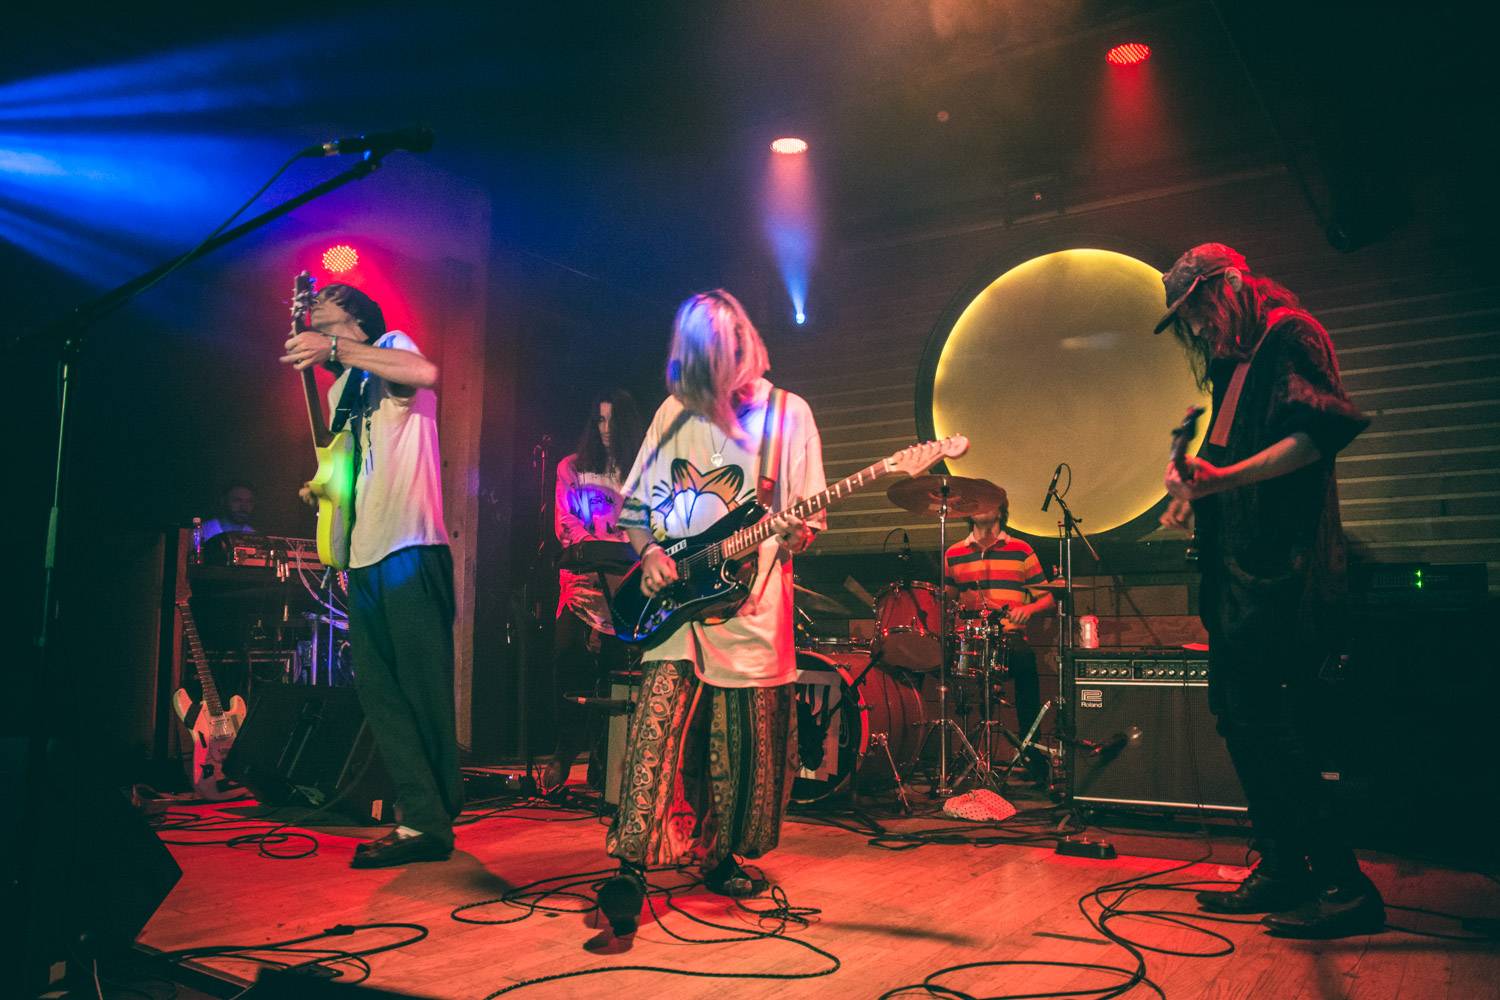 DIIV at Fortune Sound Club, Vancouver, Oct 20 2015. Pavel Boiko photo.